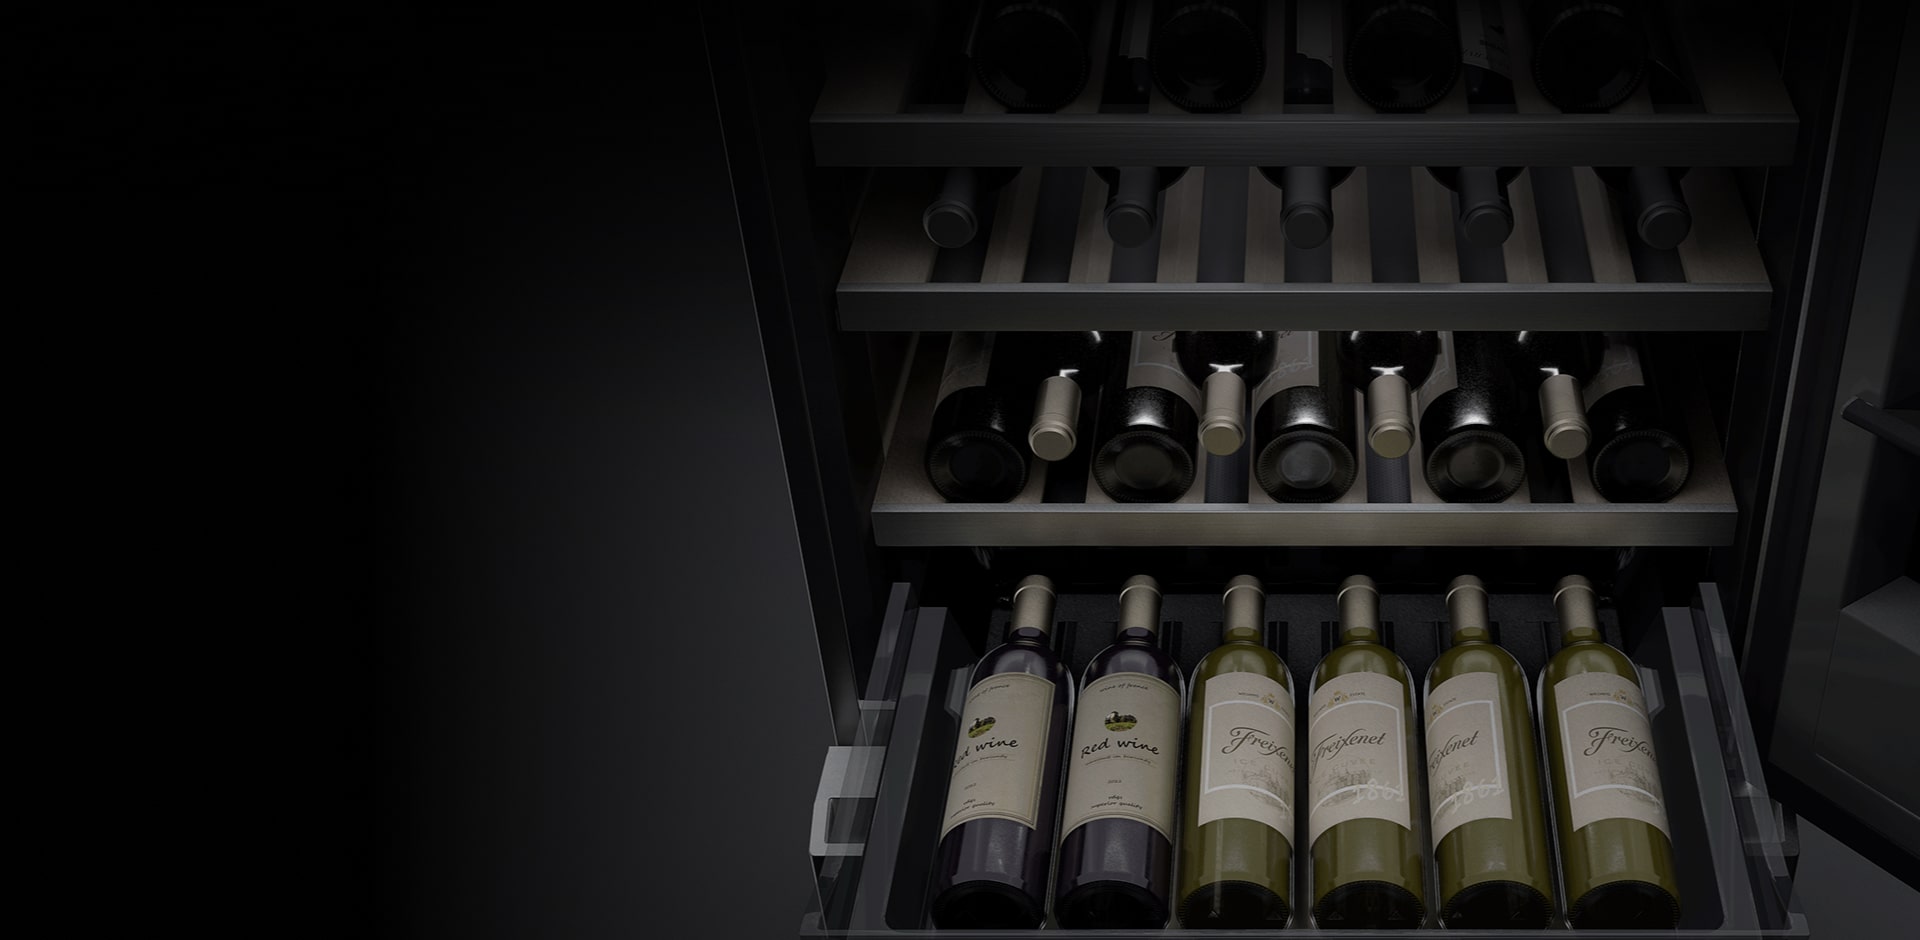 A close-up image of the inside of the wine cellar. Several bottles of wine are stored on the shelves, and the bottom shelf has been pulled out so that the wines can be easily viewed and accessed.